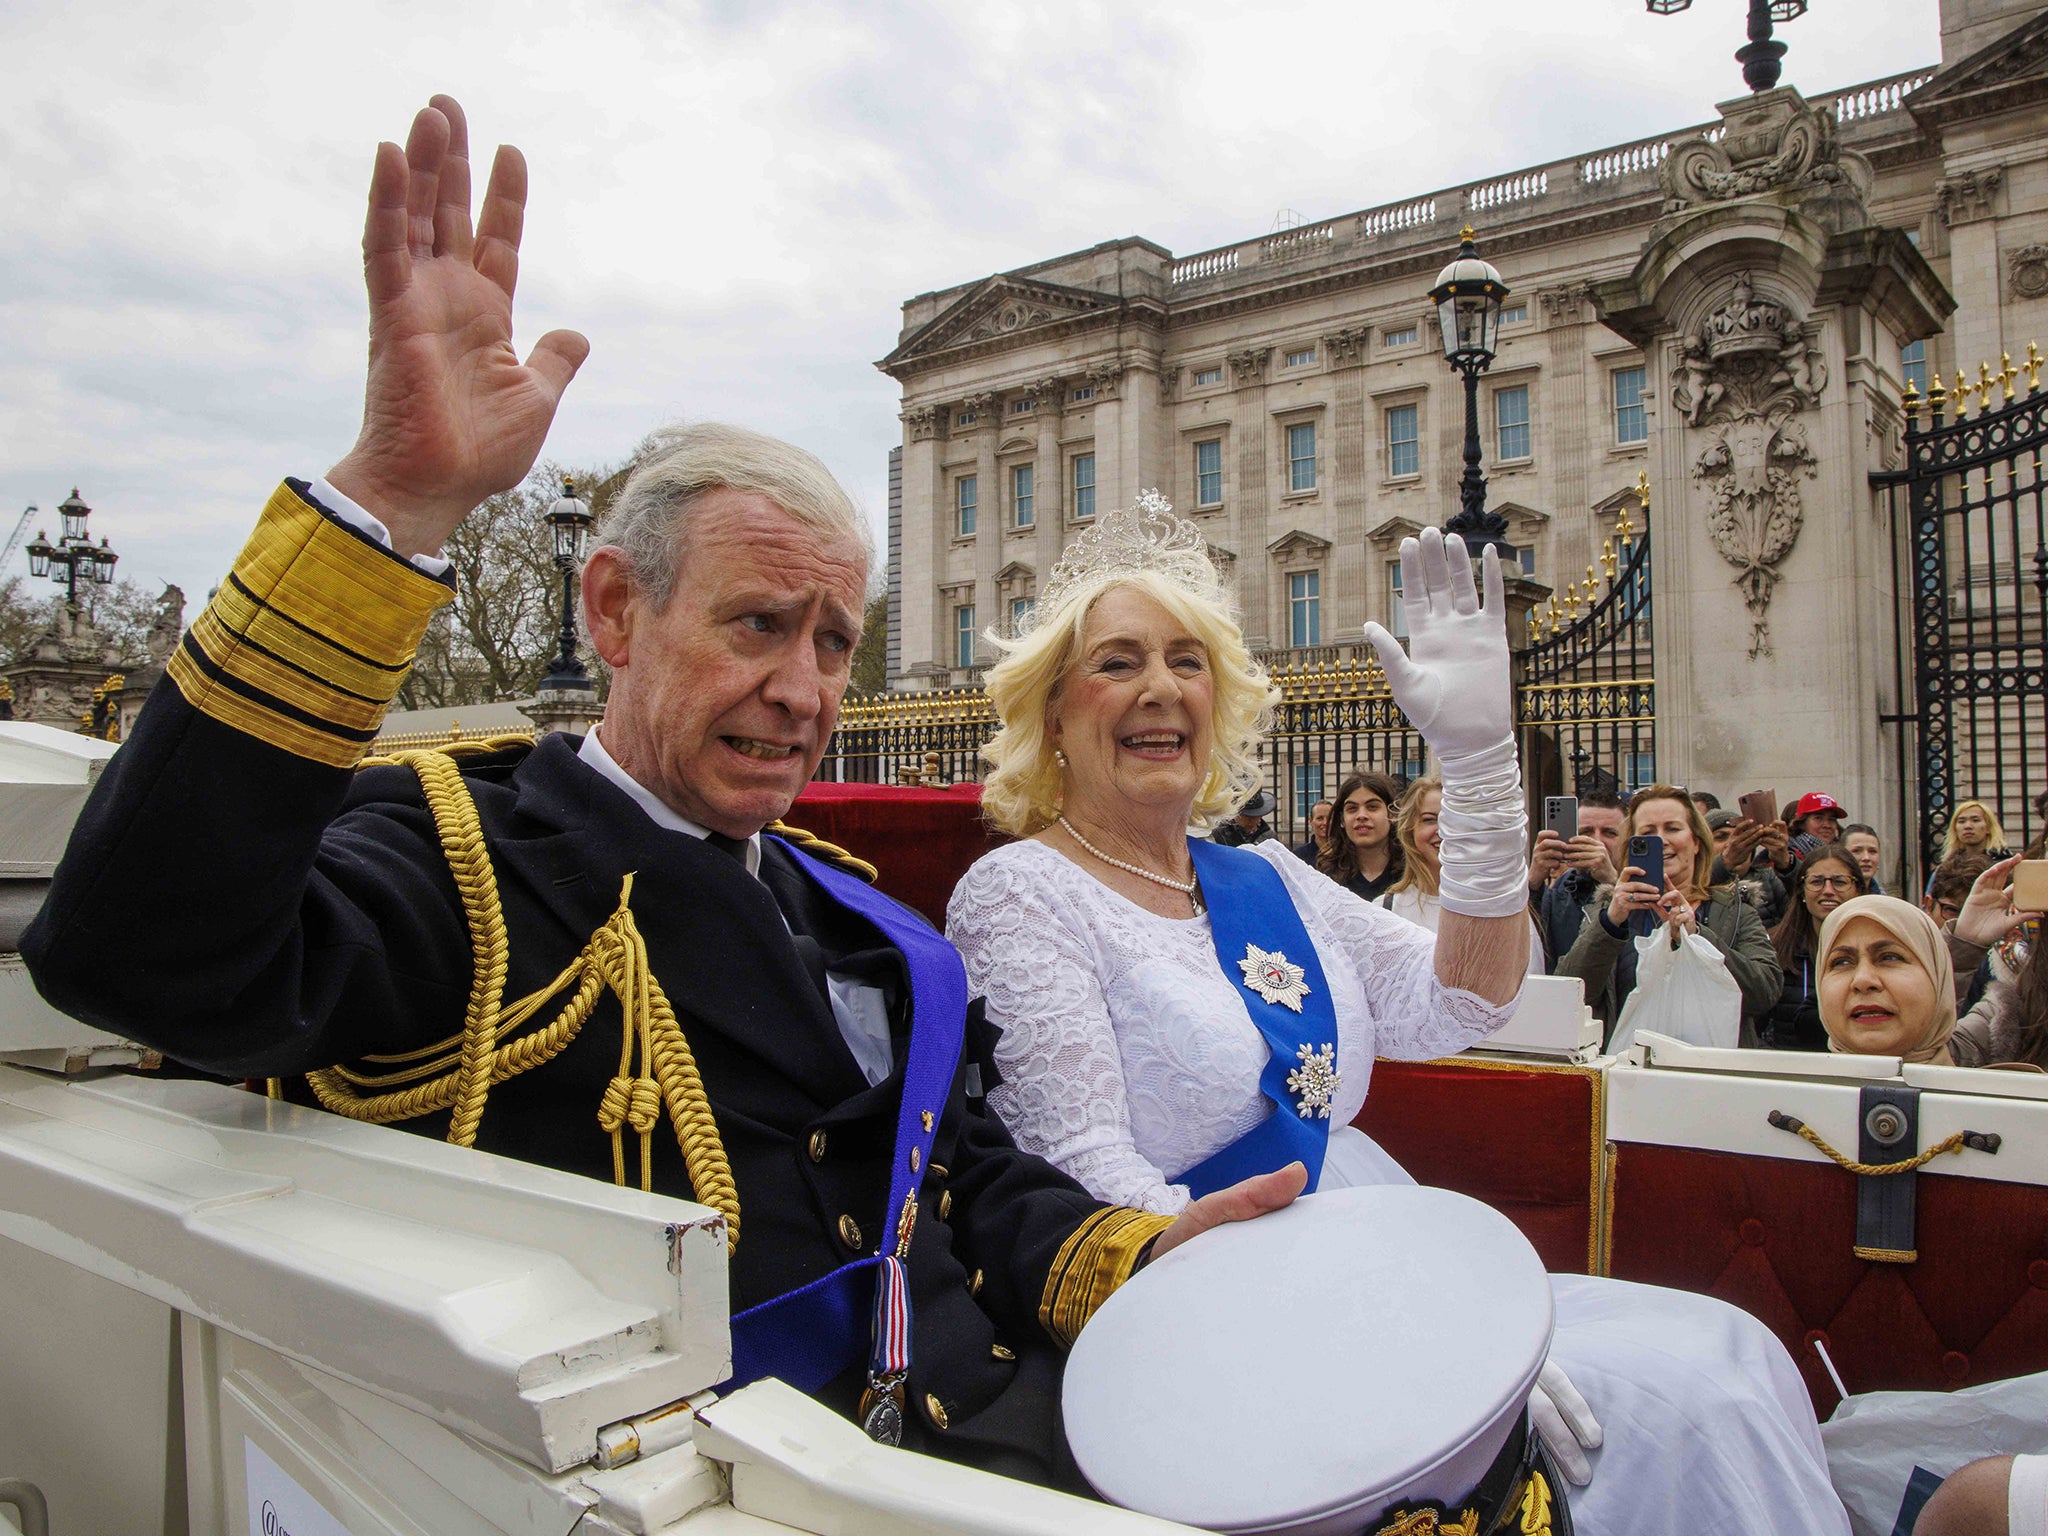 Lookalikes of King Charles III and Camilla, the Queen Consort, pass Buckingham Palace in April